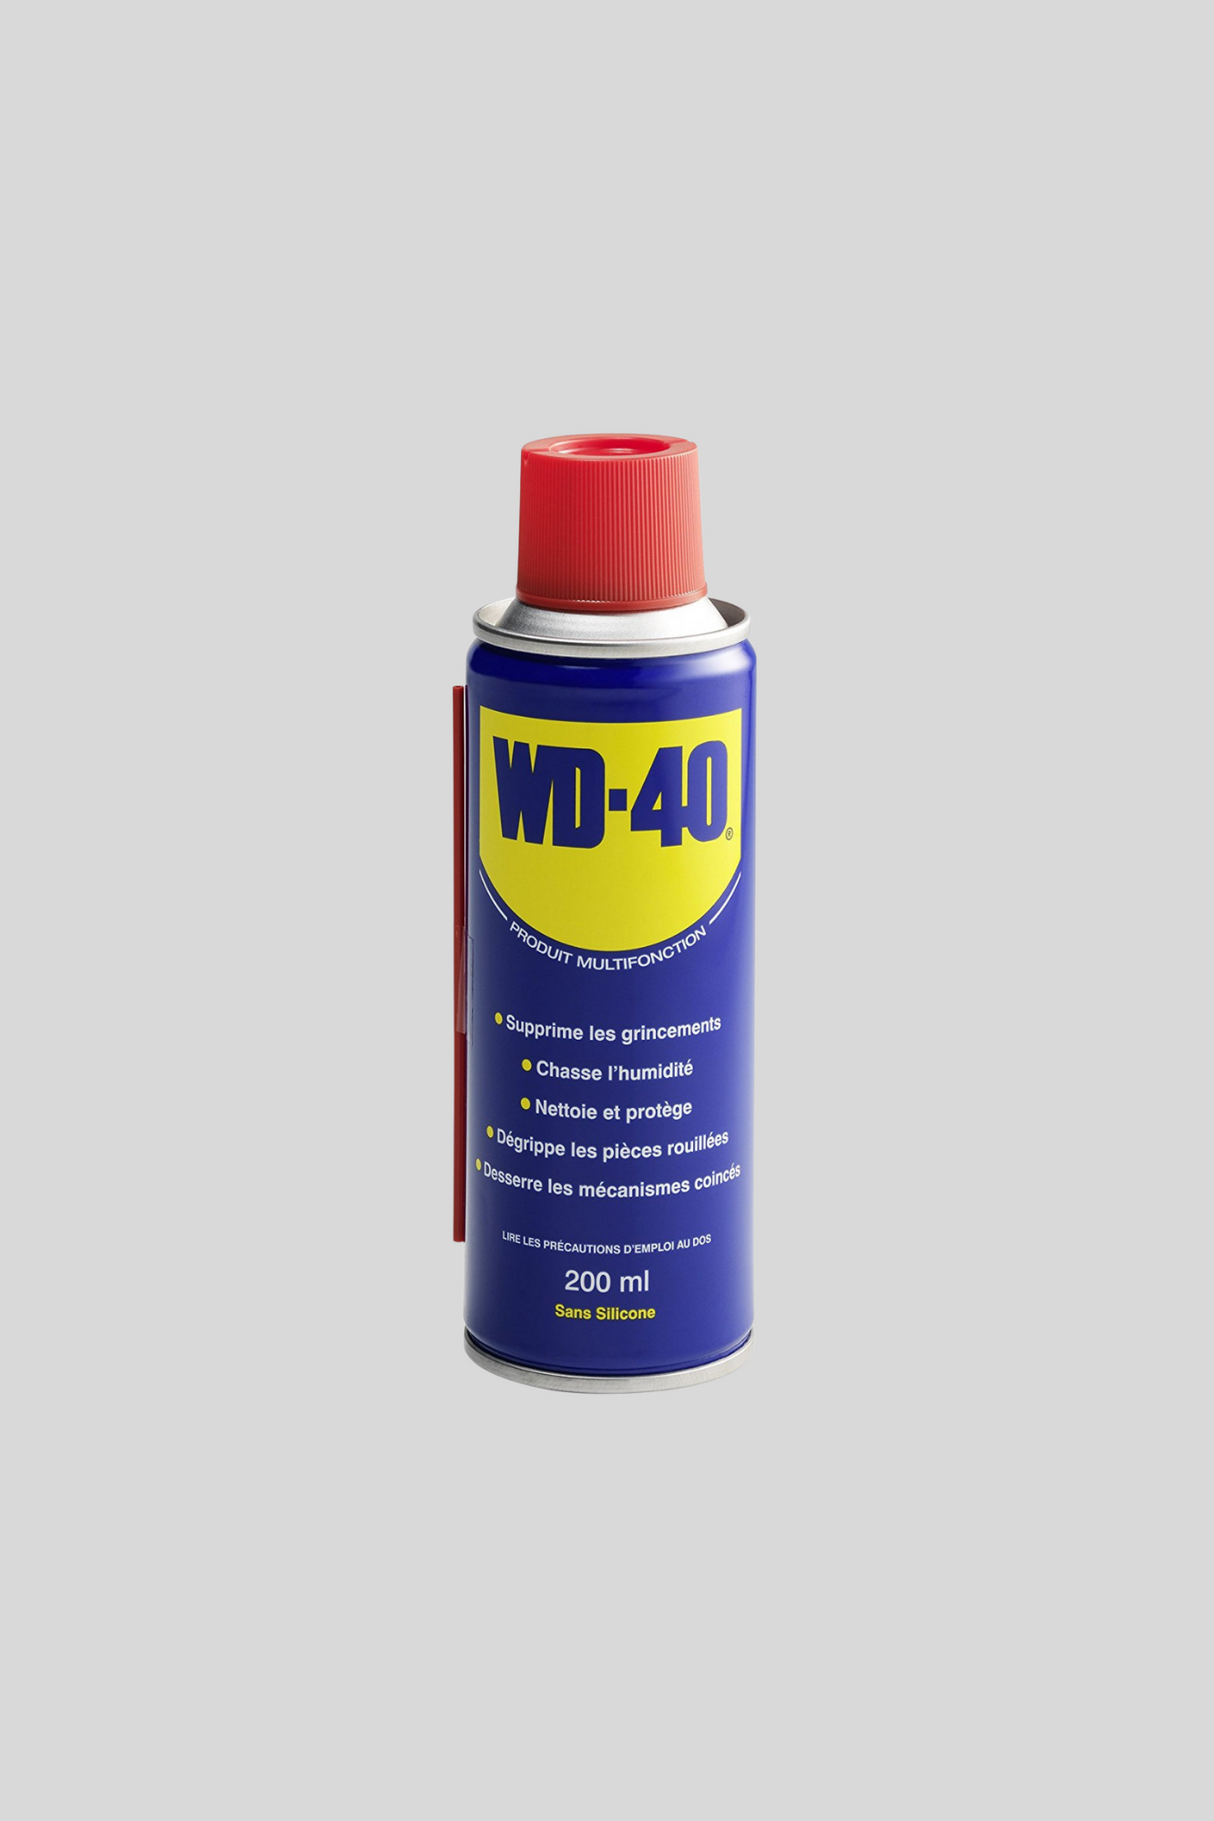 wd-40 cleaner 200ml